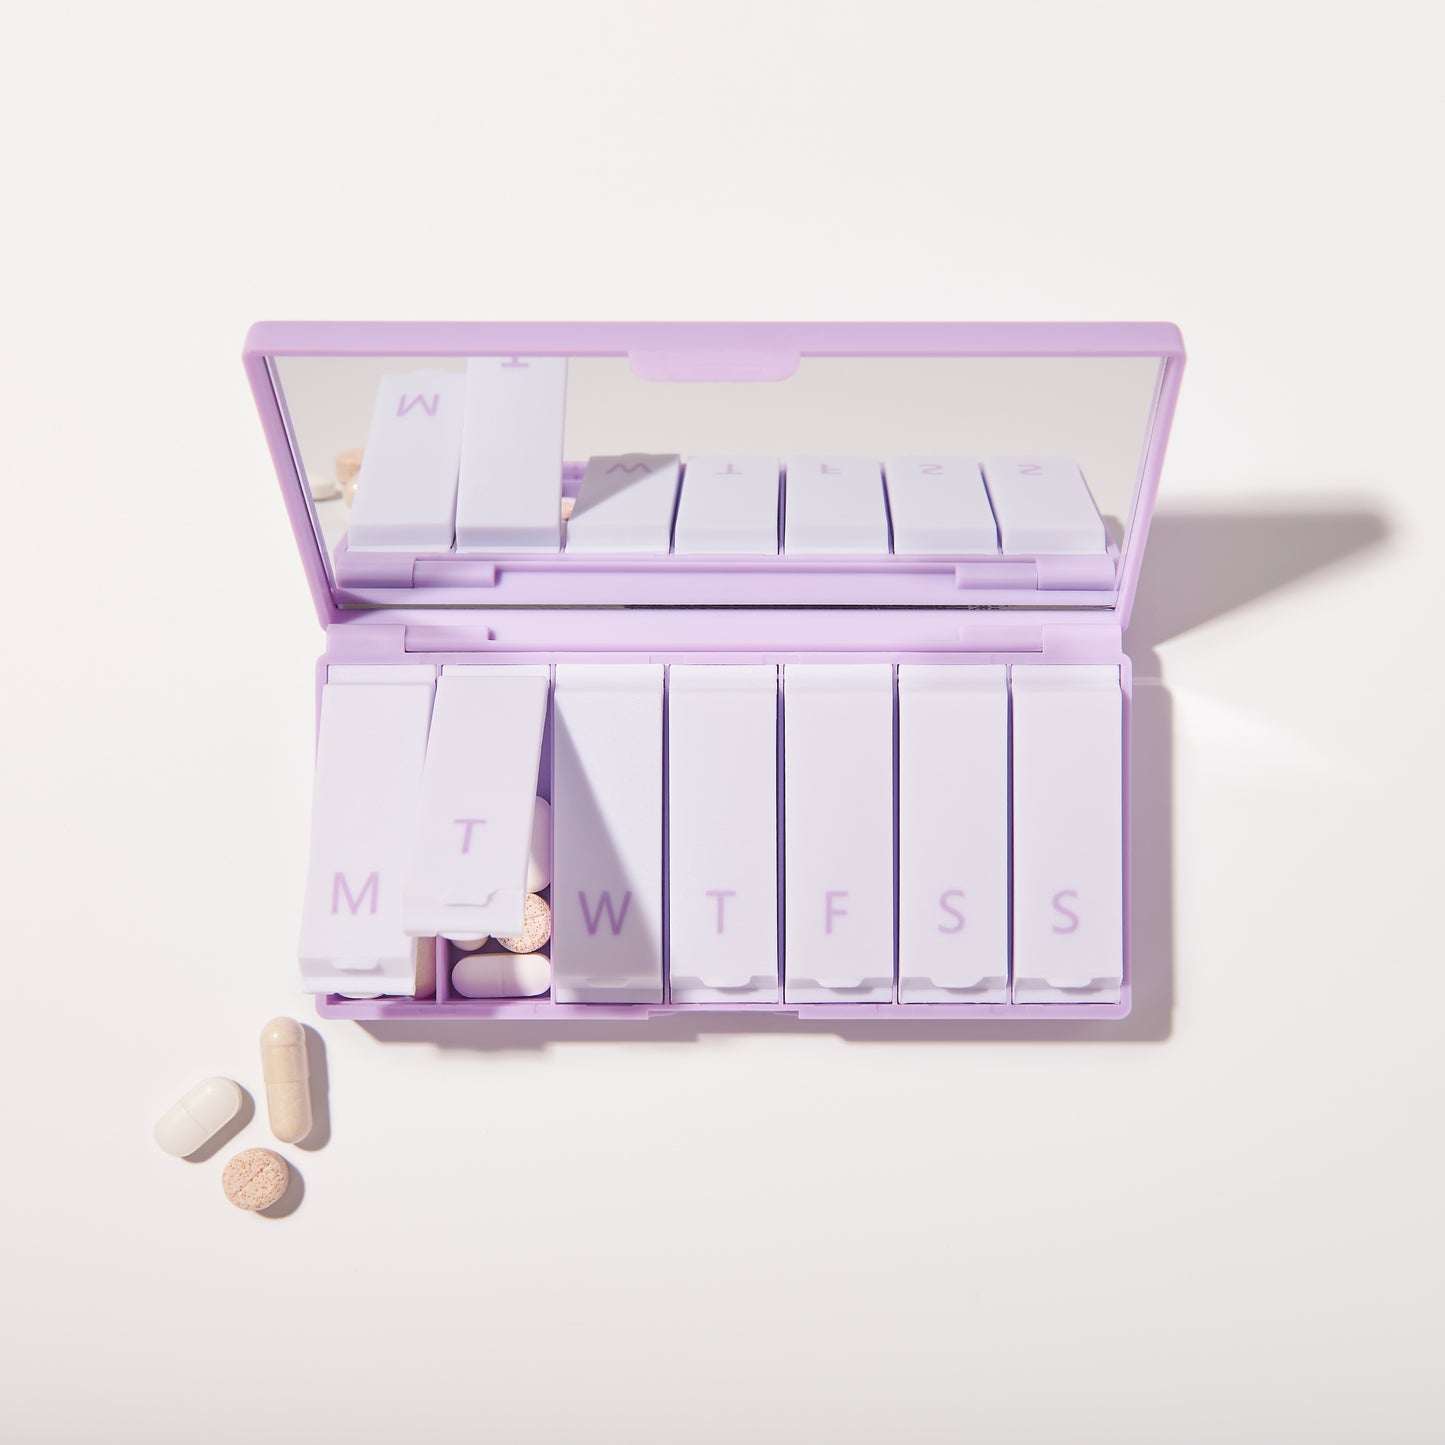 7 Day Pill Case with Mirror in Lavender Colour